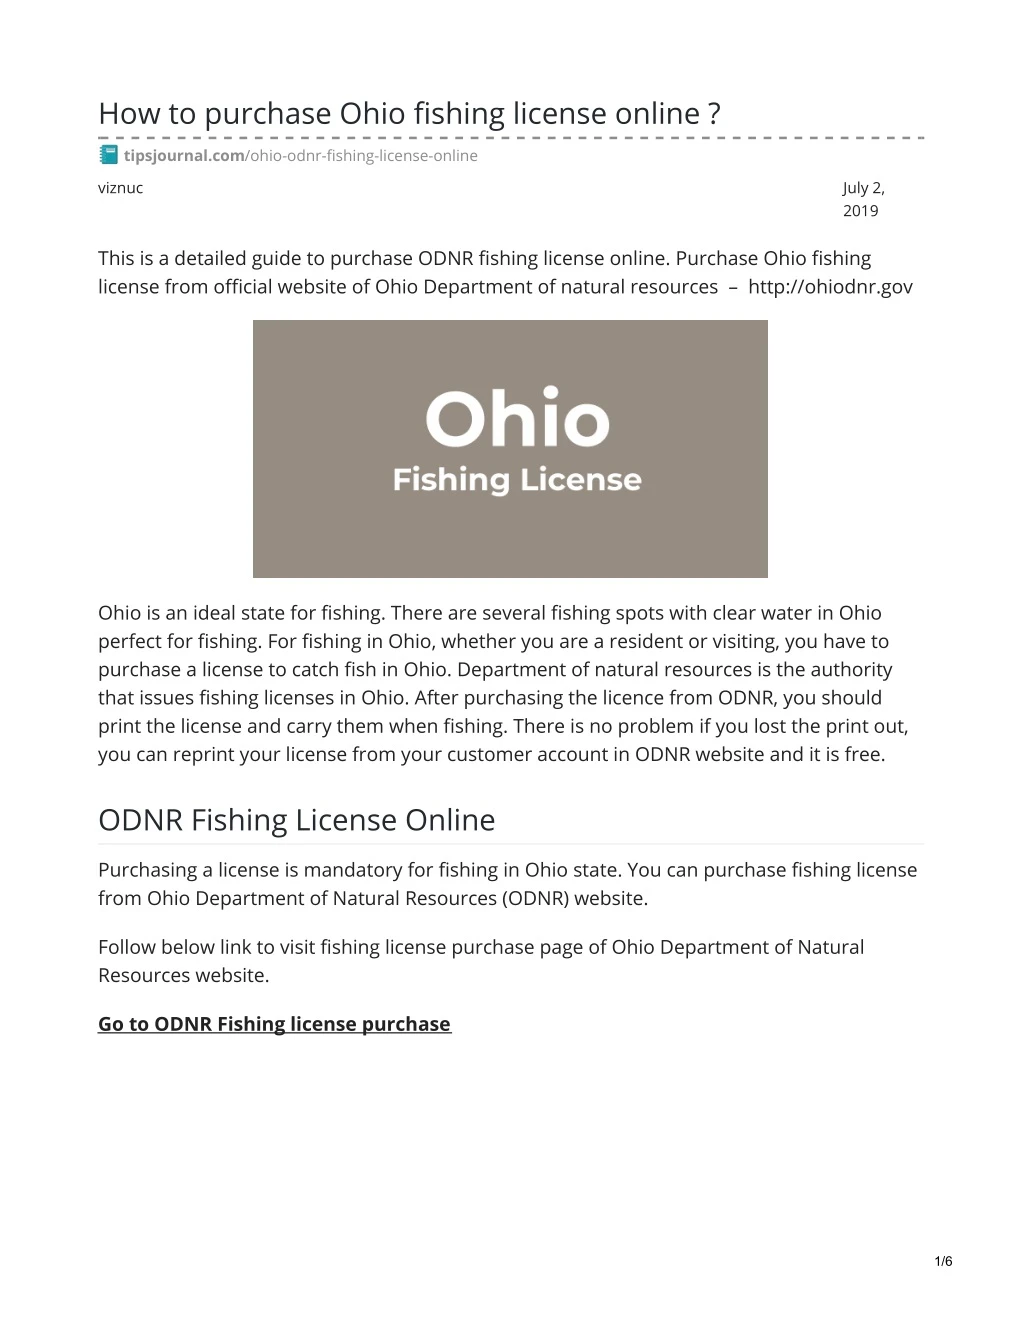 how to purchase ohio fishing license online